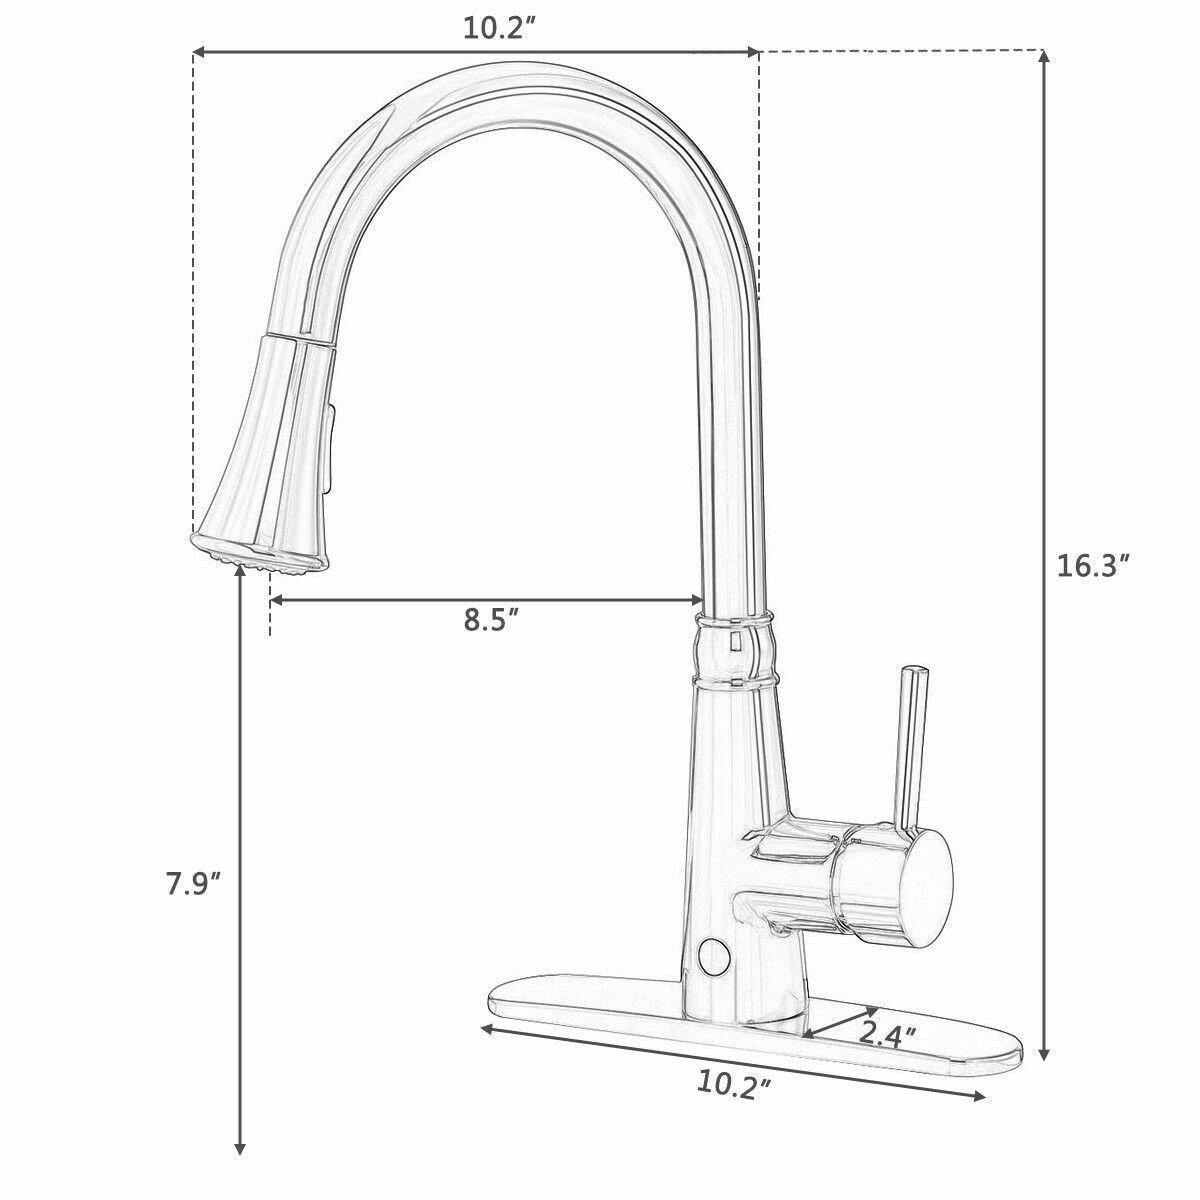 Costway Pull-down Single Handle Brushed Nickel Kitchen Faucet